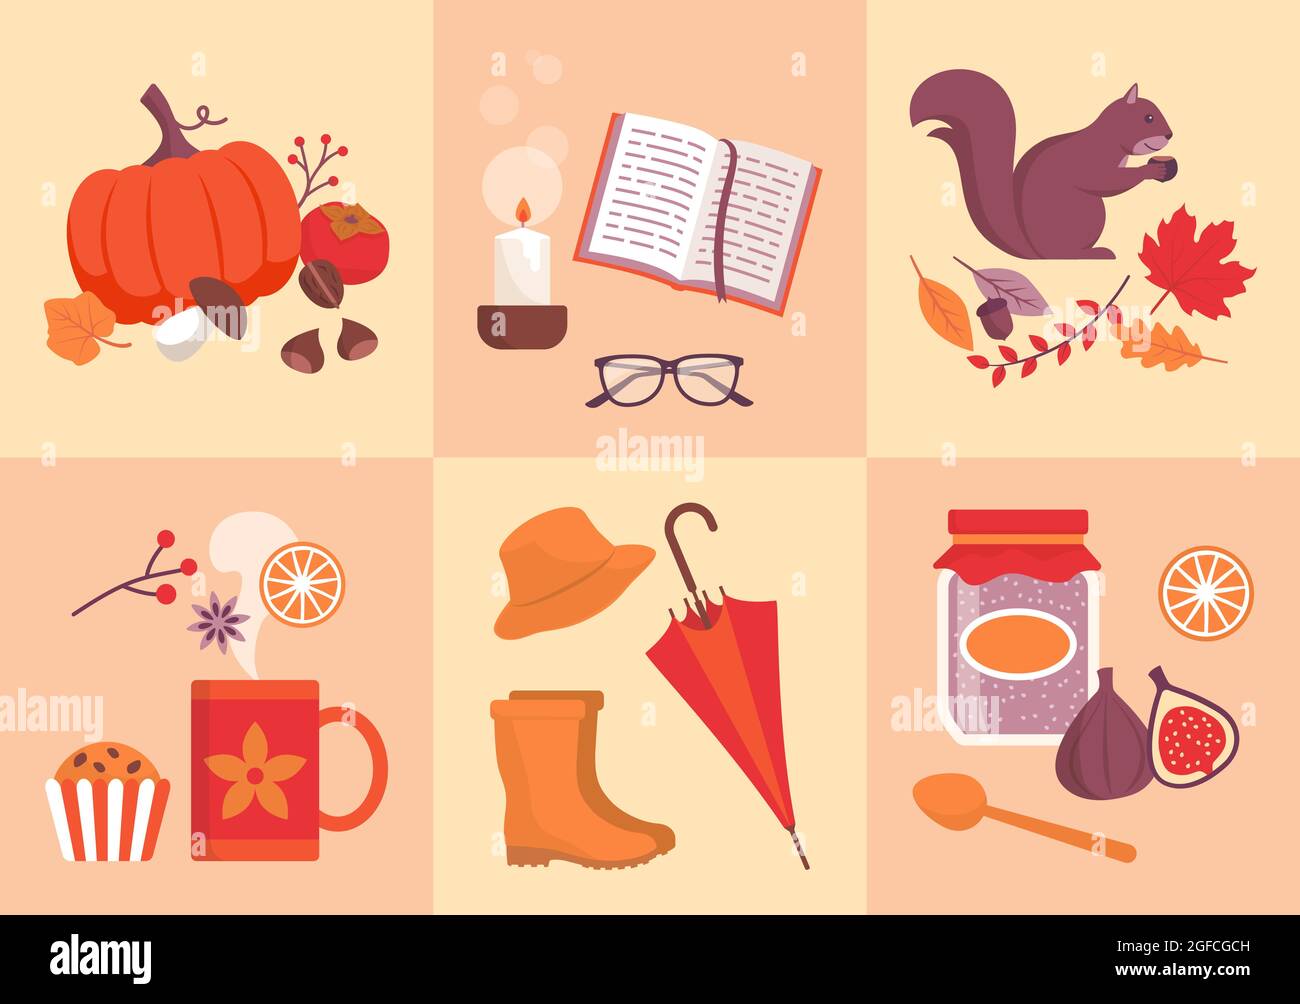 Fall season icons set: fruits, vegetables and objects Stock Vector